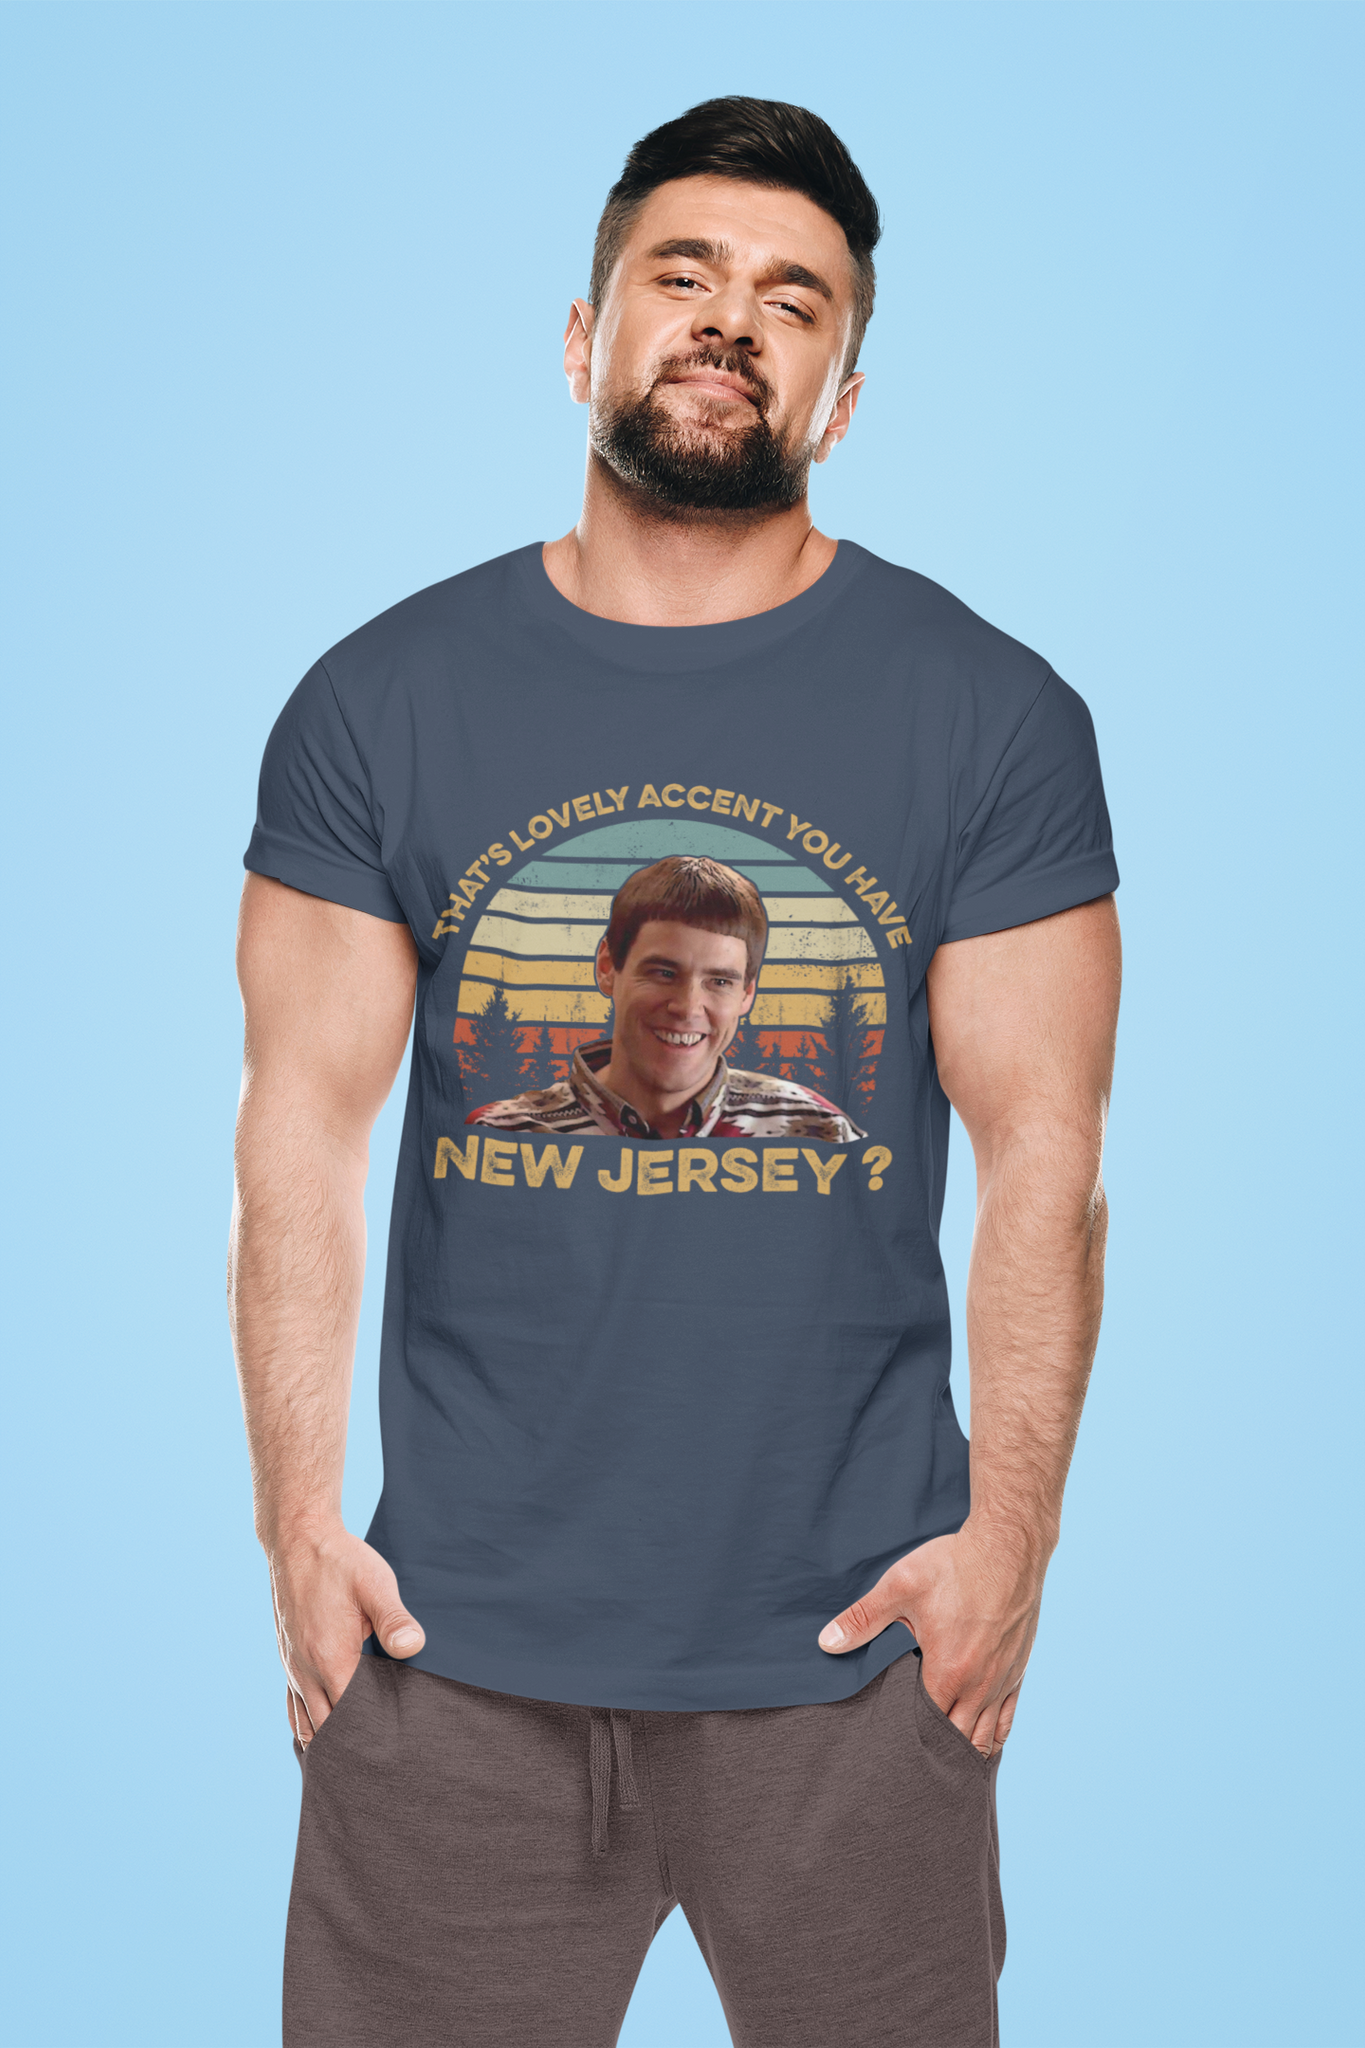 Dumb And Dumber Vintage T Shirt, Lloyd Christmas T Shirt, Thats Lovely Accent You Have New Jersey Tshirt